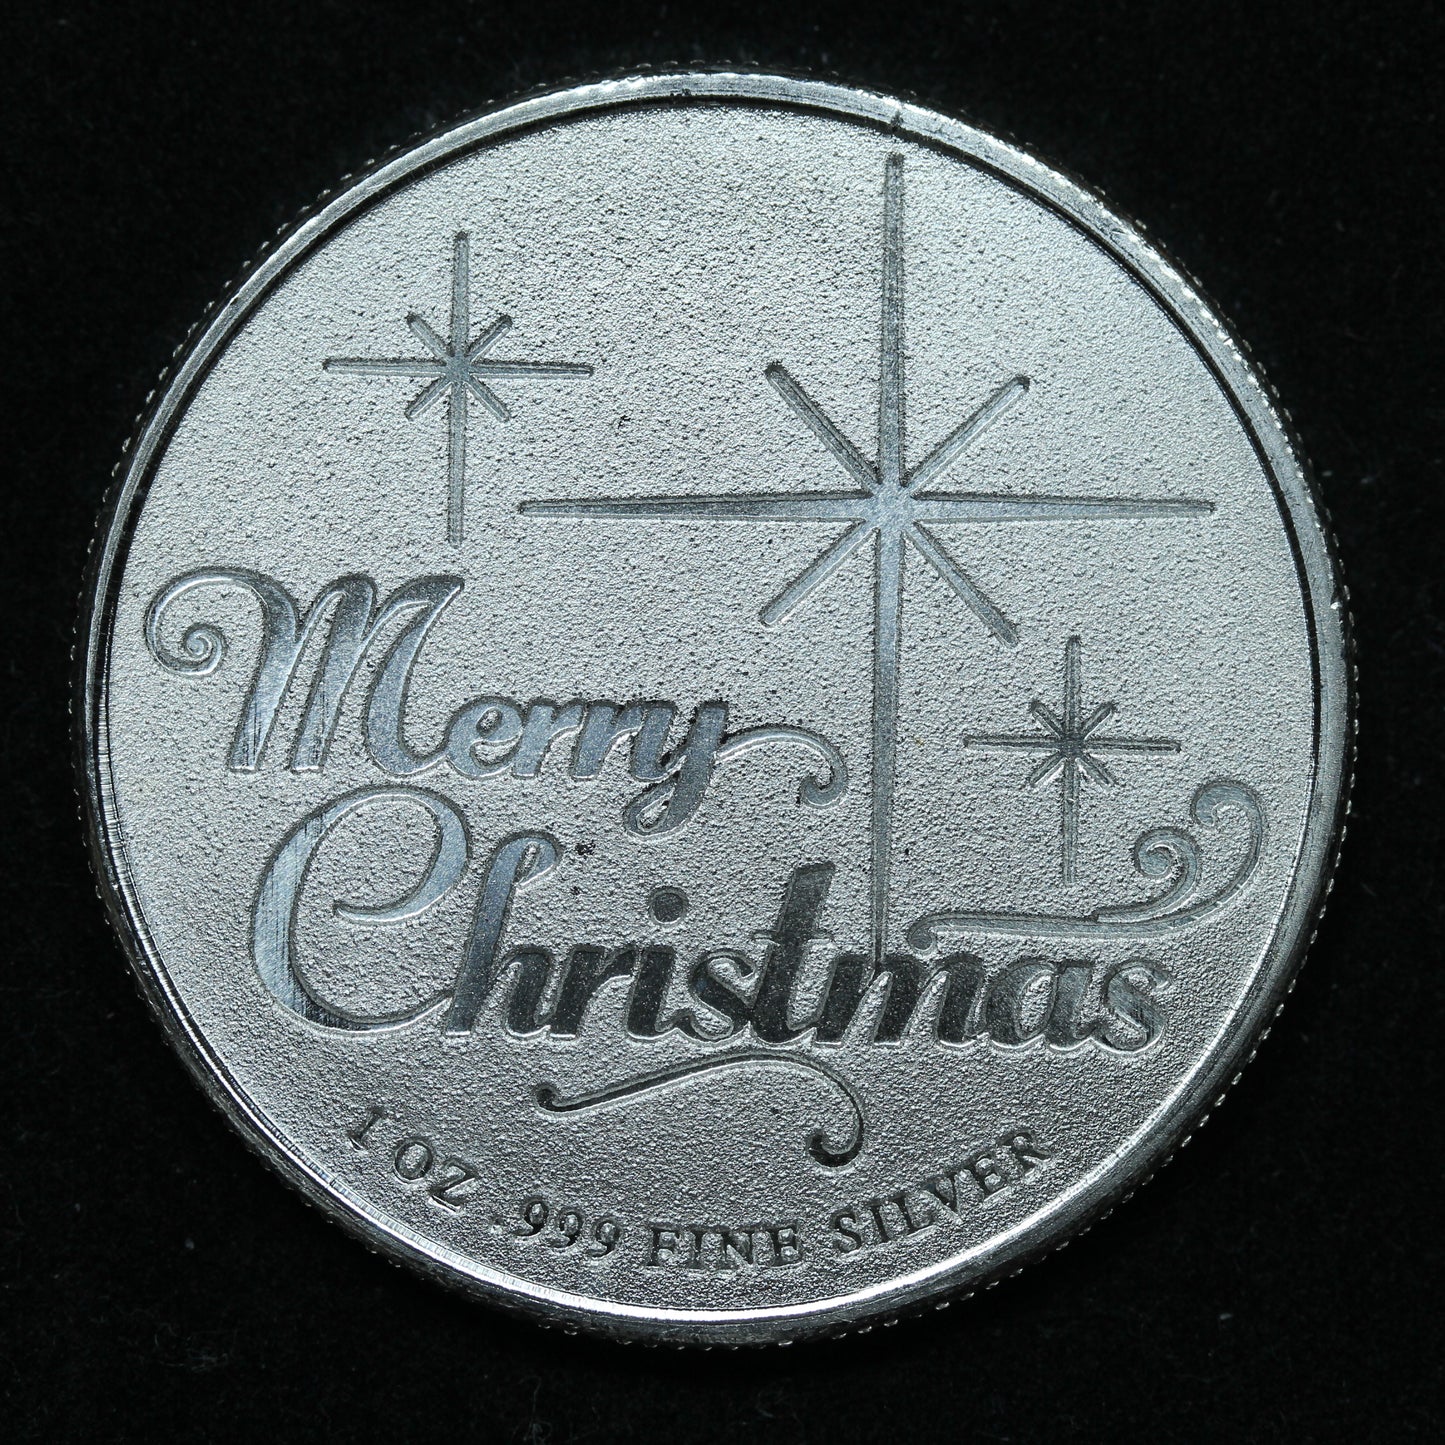 1 oz .999 Fine Silver Round Merry Christmas 'Twas The Night Before Christmas w/ Capsule